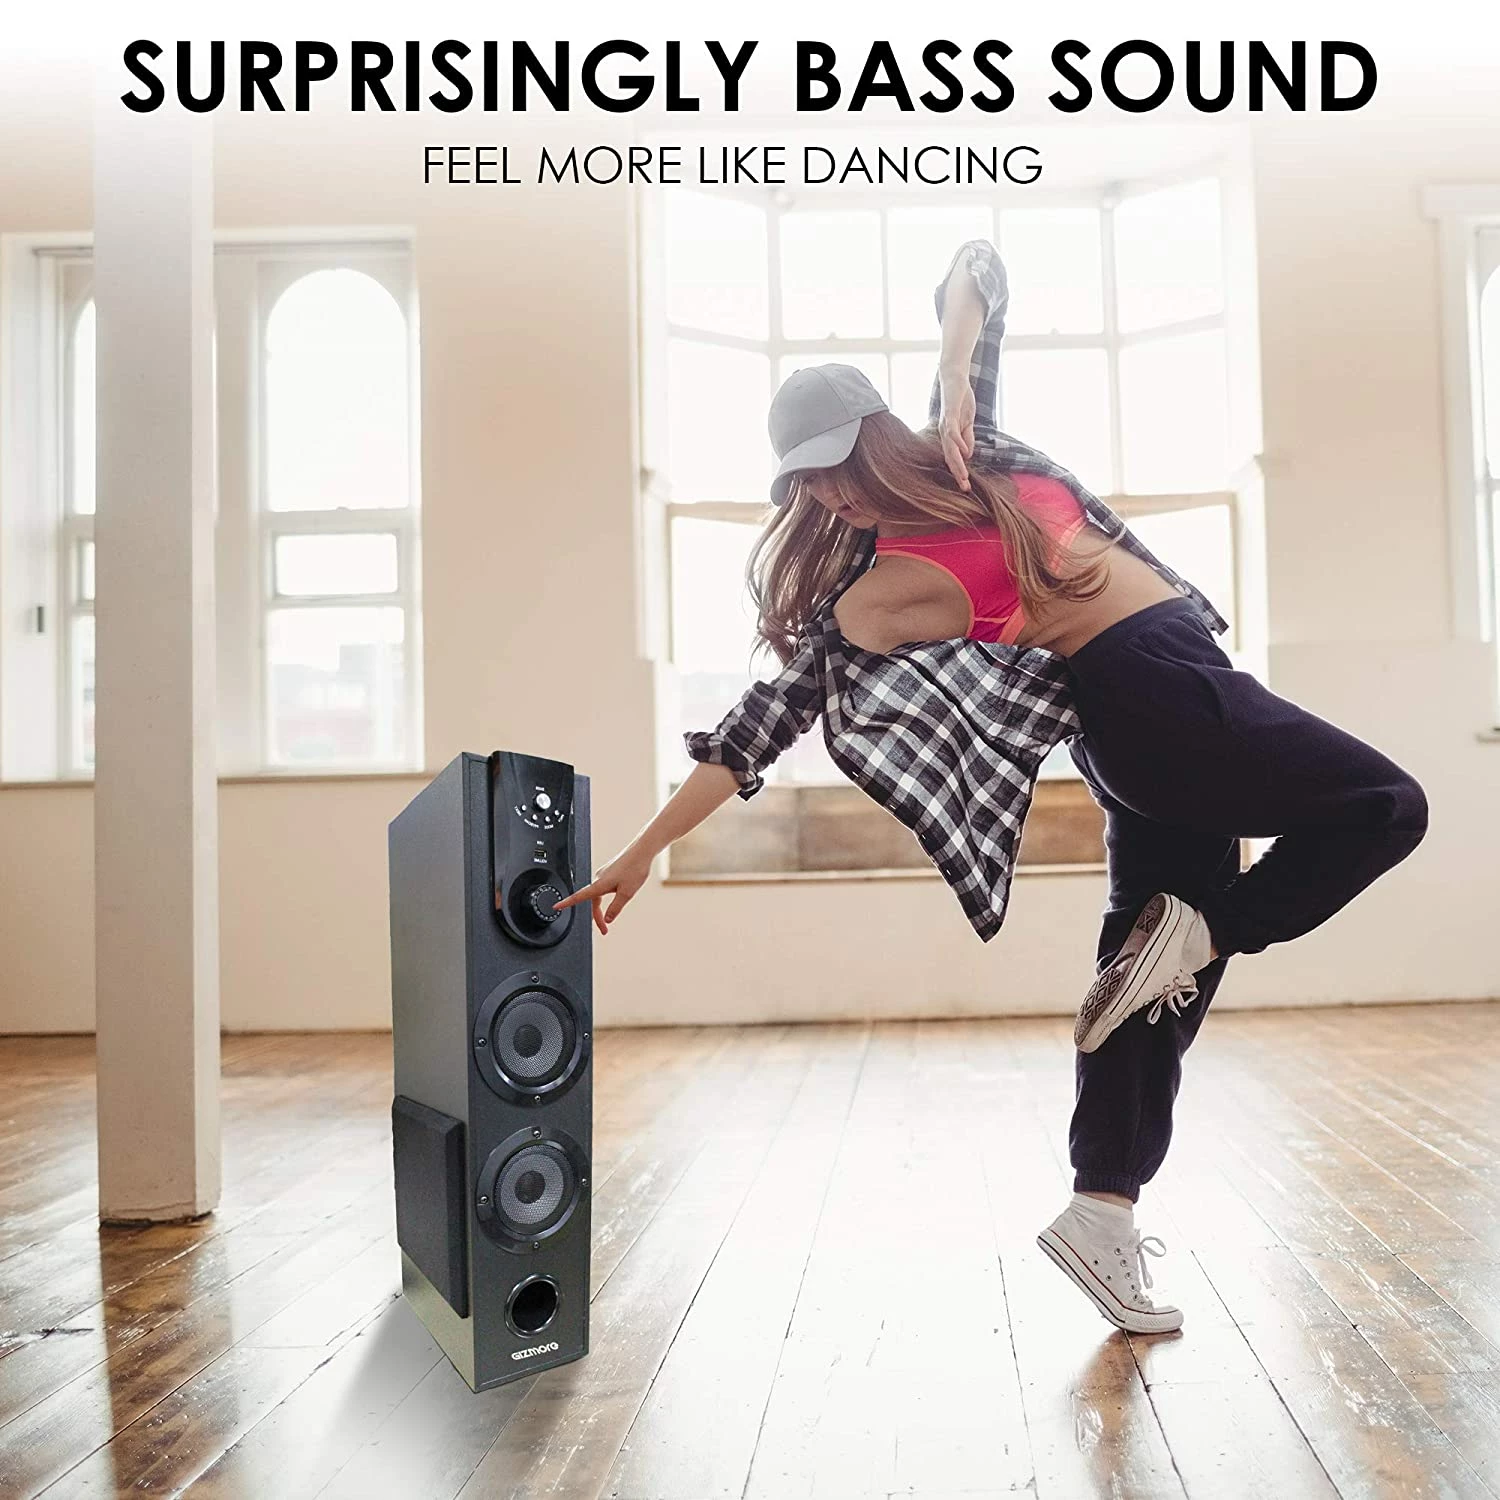 GOgroove Bluetooth Tower Speaker with Built-in Subwoofer